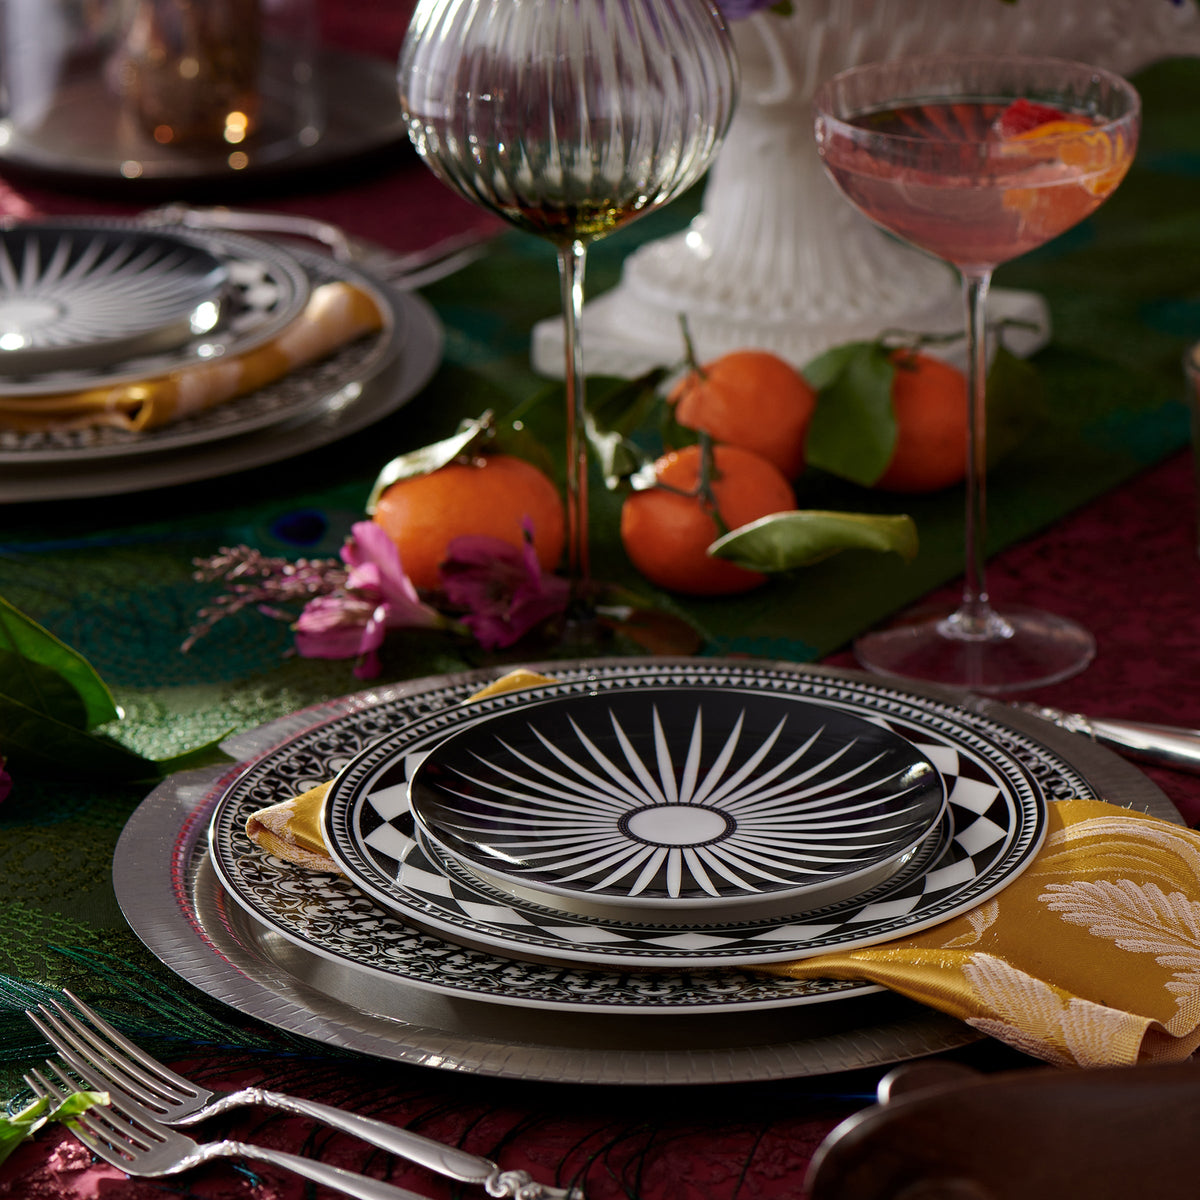 A dinner table setting with Caskata Artisanal Home&#39;s Fez Rimmed Salad Plates, gold utensils, and orange napkins. A cocktail glass and oranges are also on the table, with flowers and greenery adding sophisticated global decor.